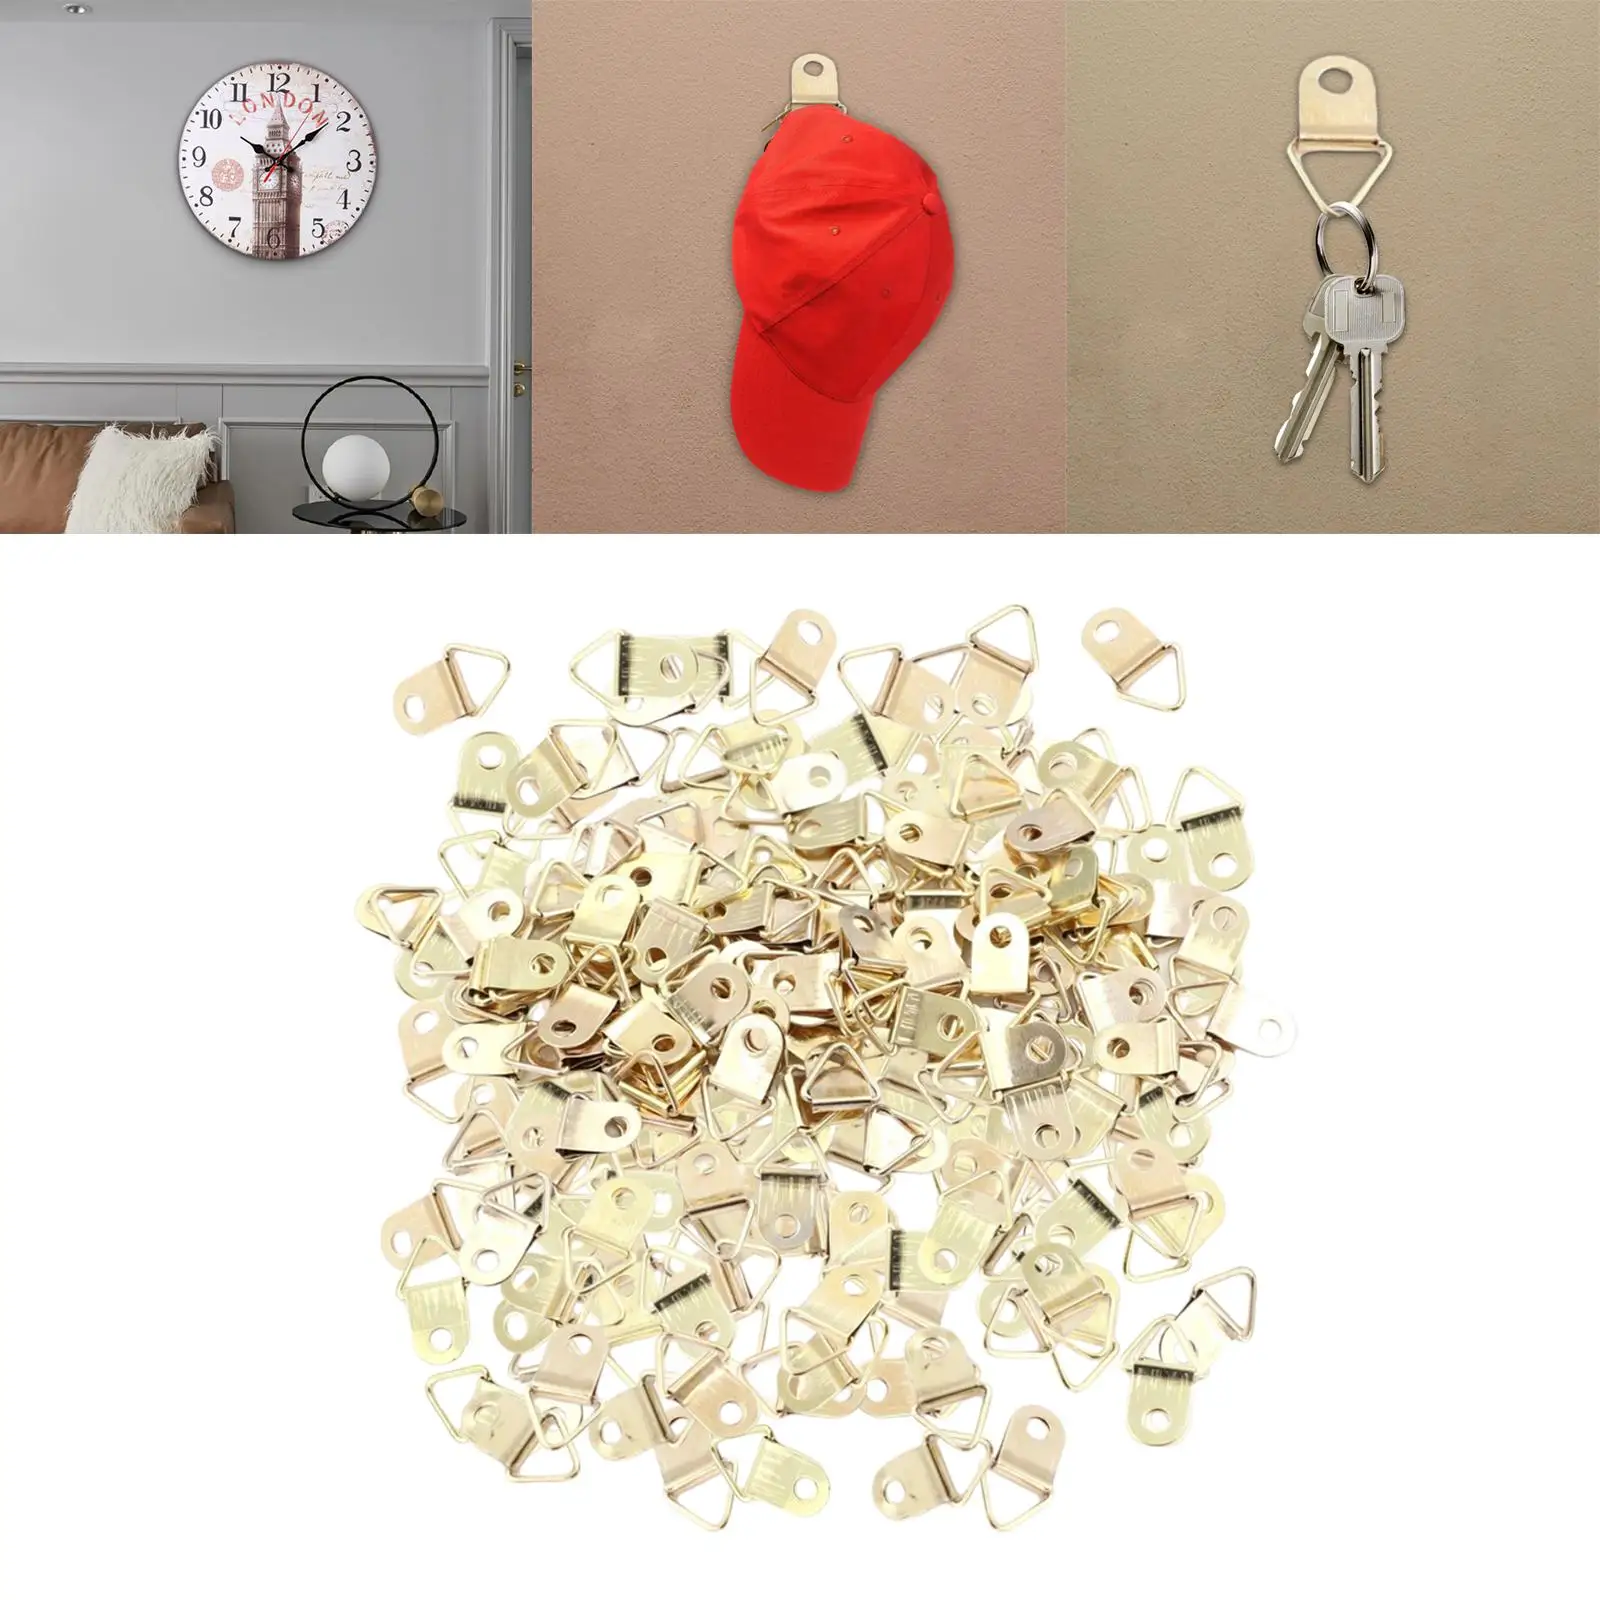 1000Pcs Triangle D-Rings Photo Frame Hangers Heavy Duty Art Work Oil Painting Hanging Hooks Fixing Fasteners Hardware